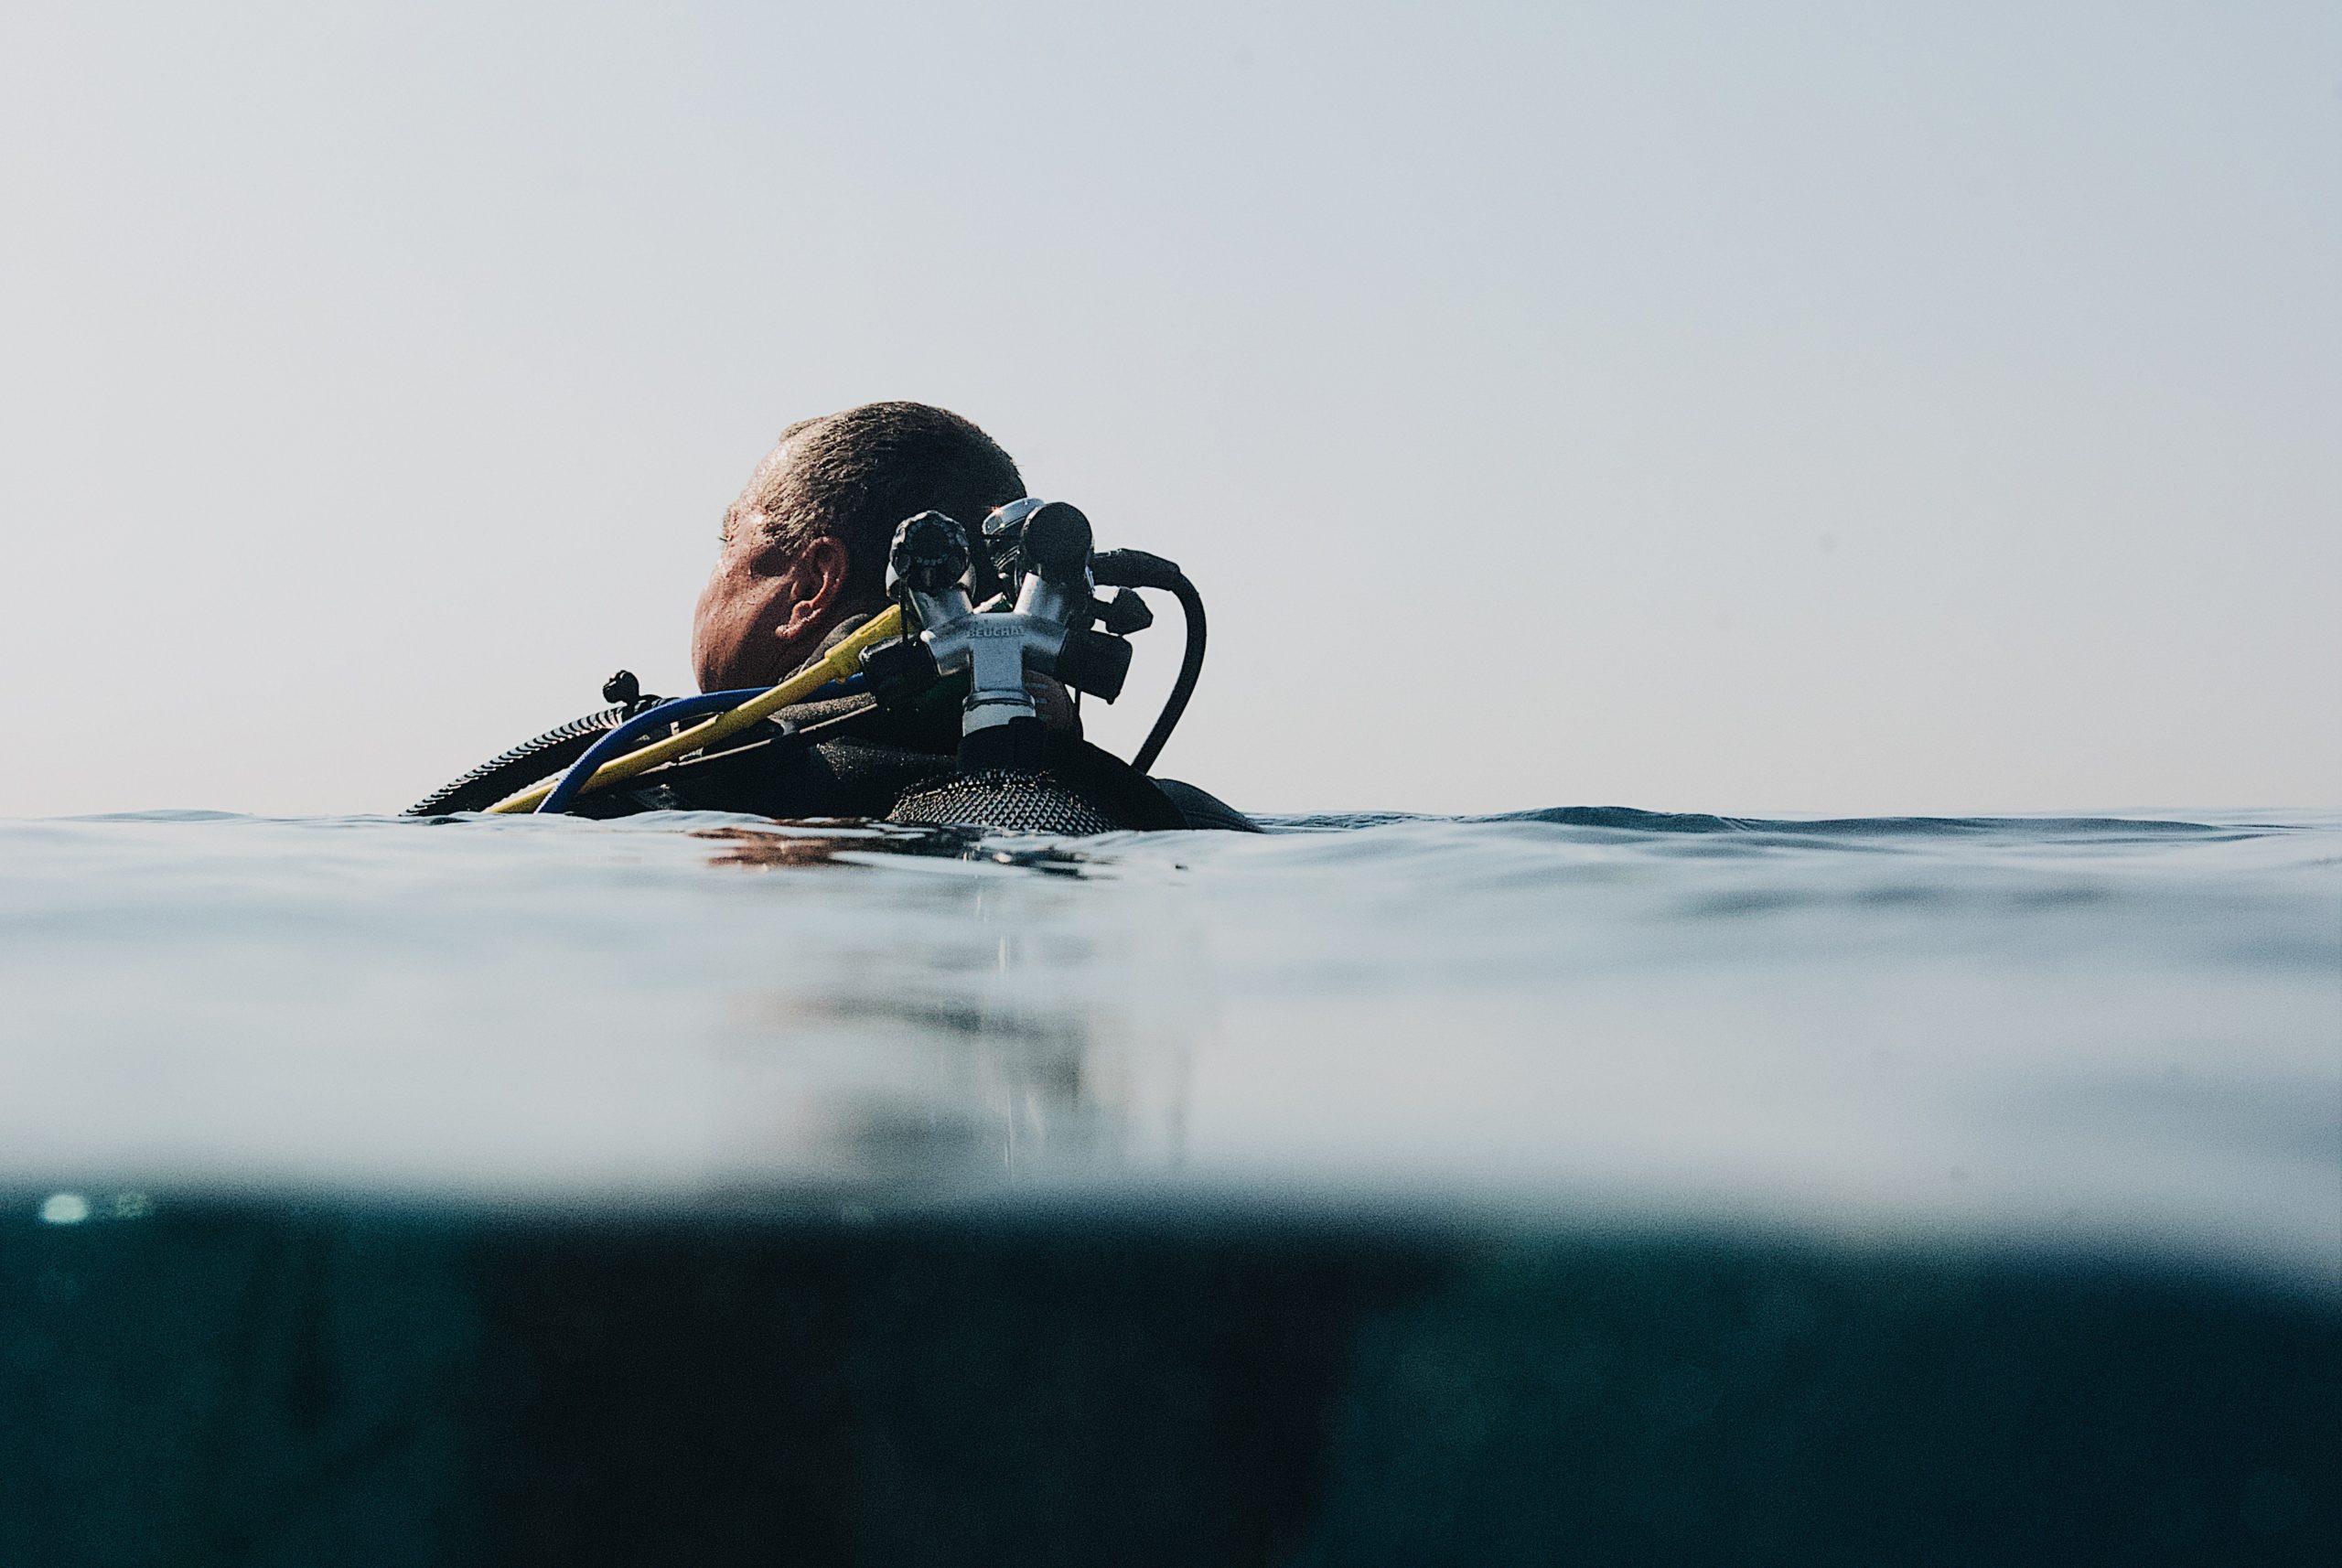 Research and Development: Scuba diver above water